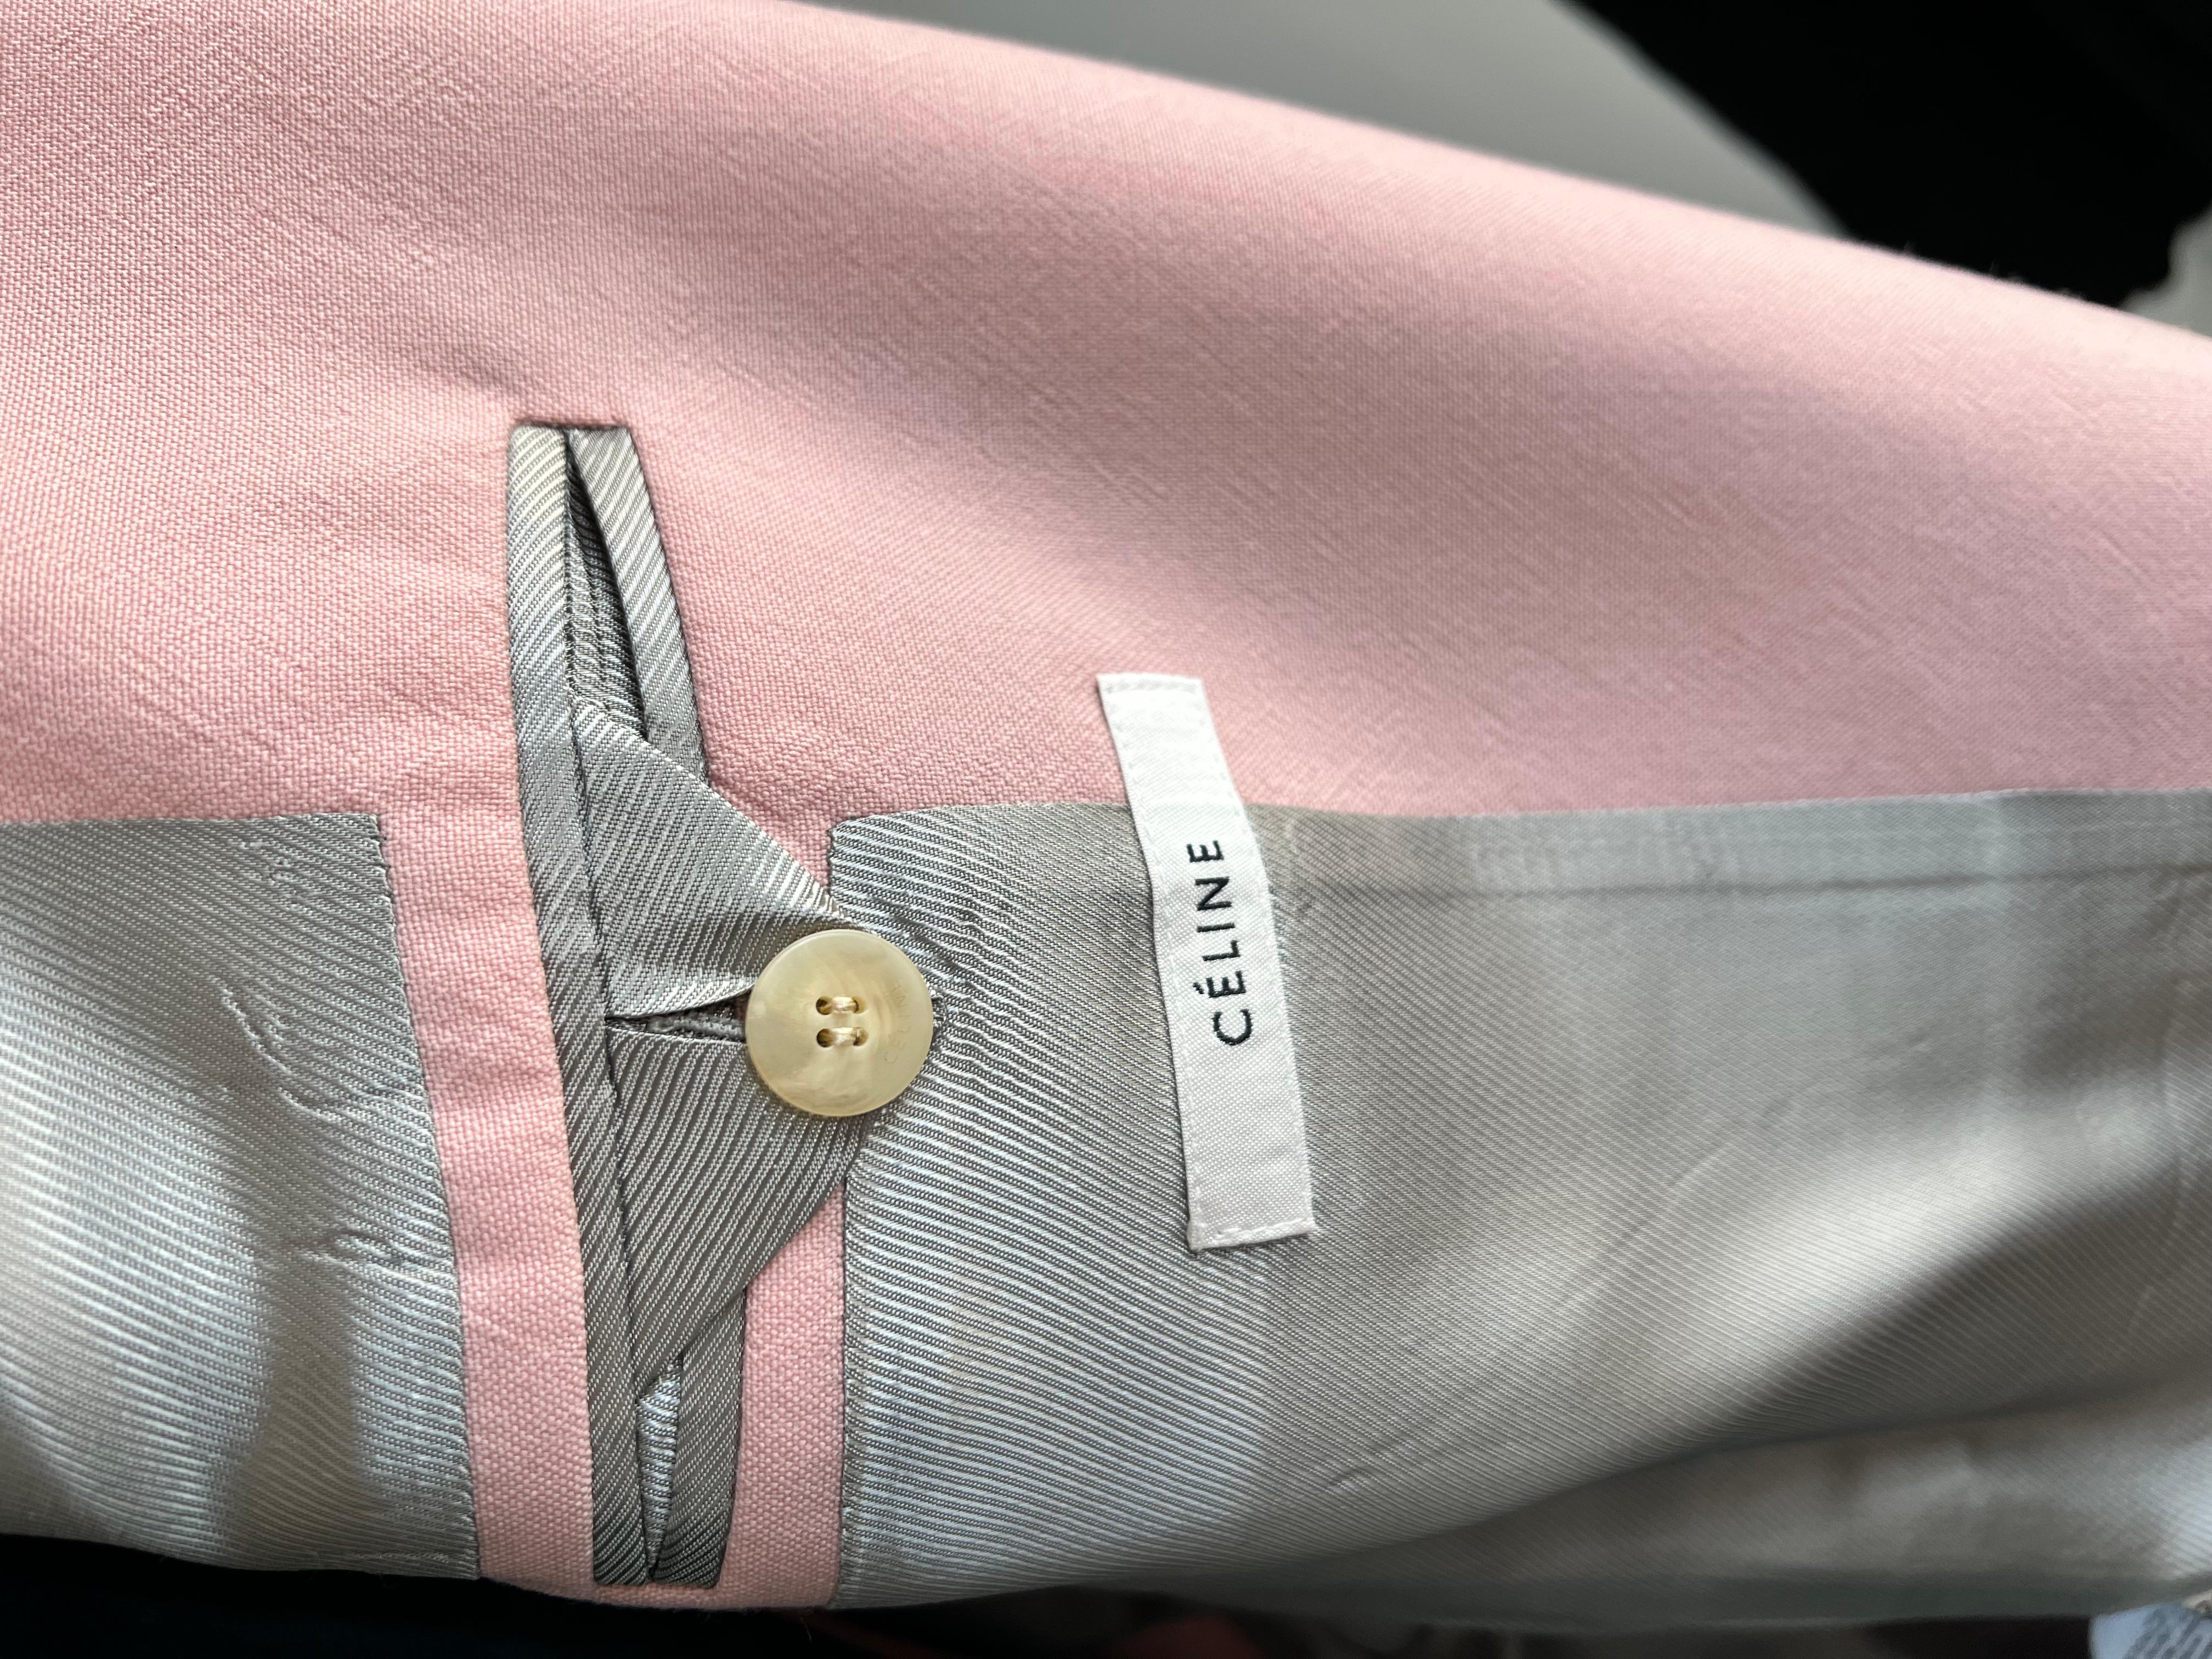 The long tailored jacket in blush pink light wool tailoring features a short notched lapel collar, padded shoulders, and a martingale belt. A slit on the back helps prevent the fabric from bunching even with the martingale buttoned

Condition: